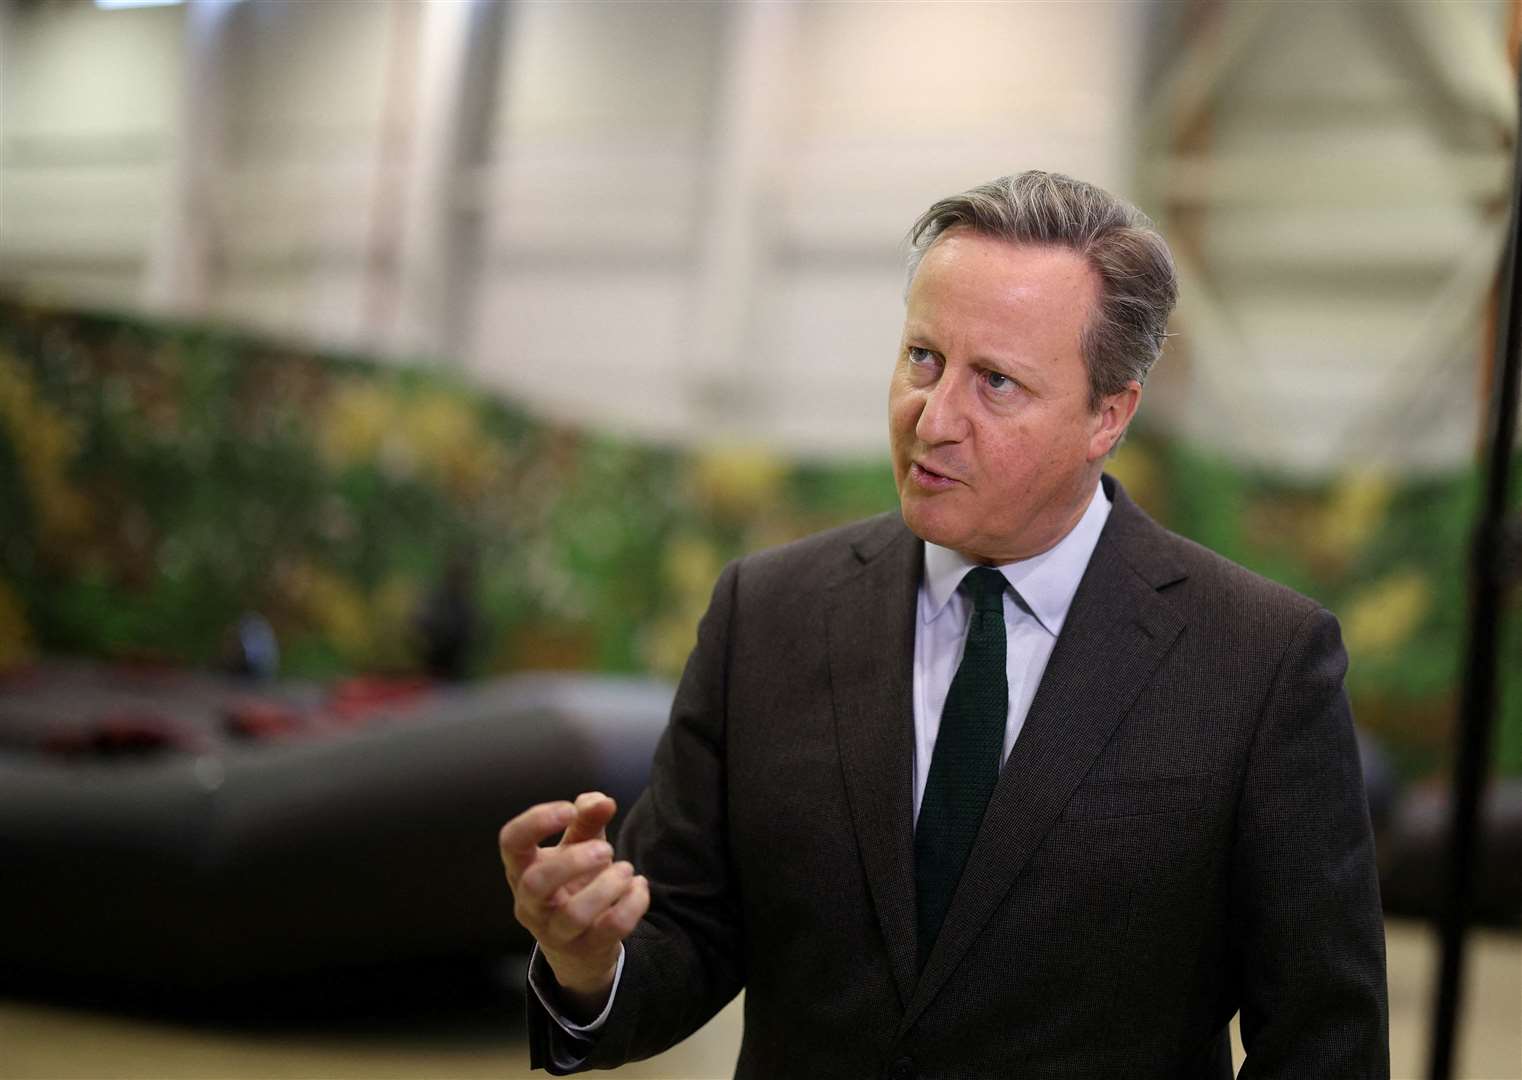 Lord Cameron has called for an immediate pause to the fighting (Stoyan Nenov/PA)